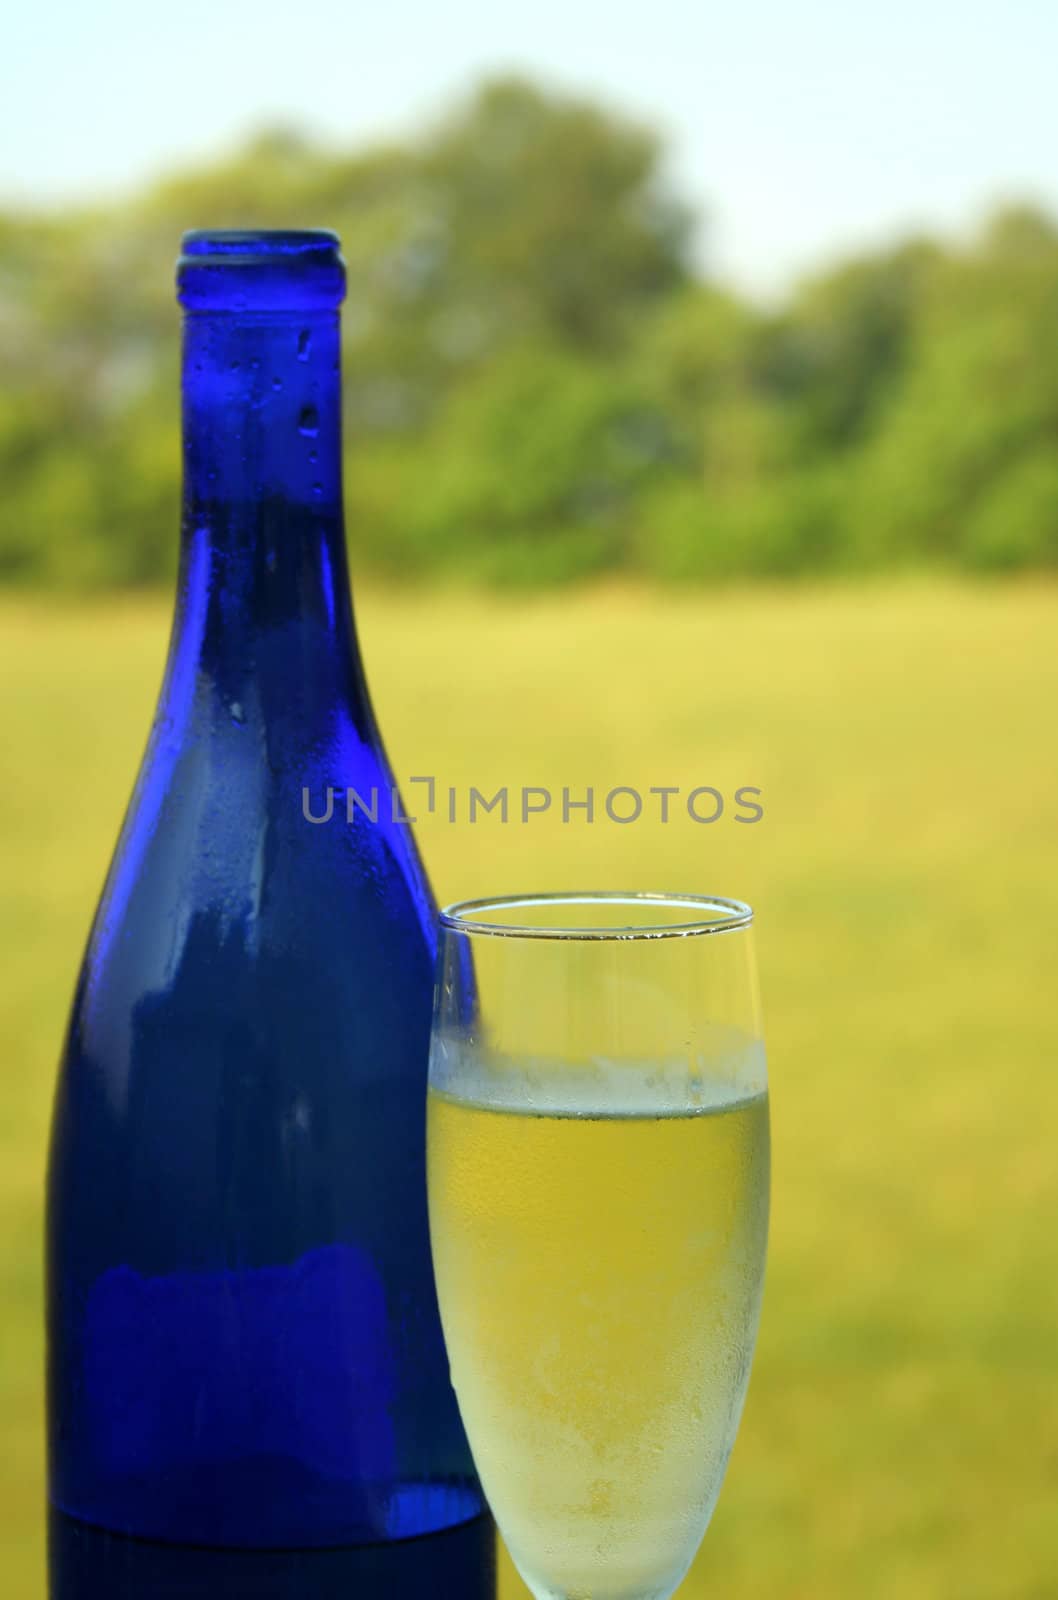 A full glass of white wine outside on a beautiful day.